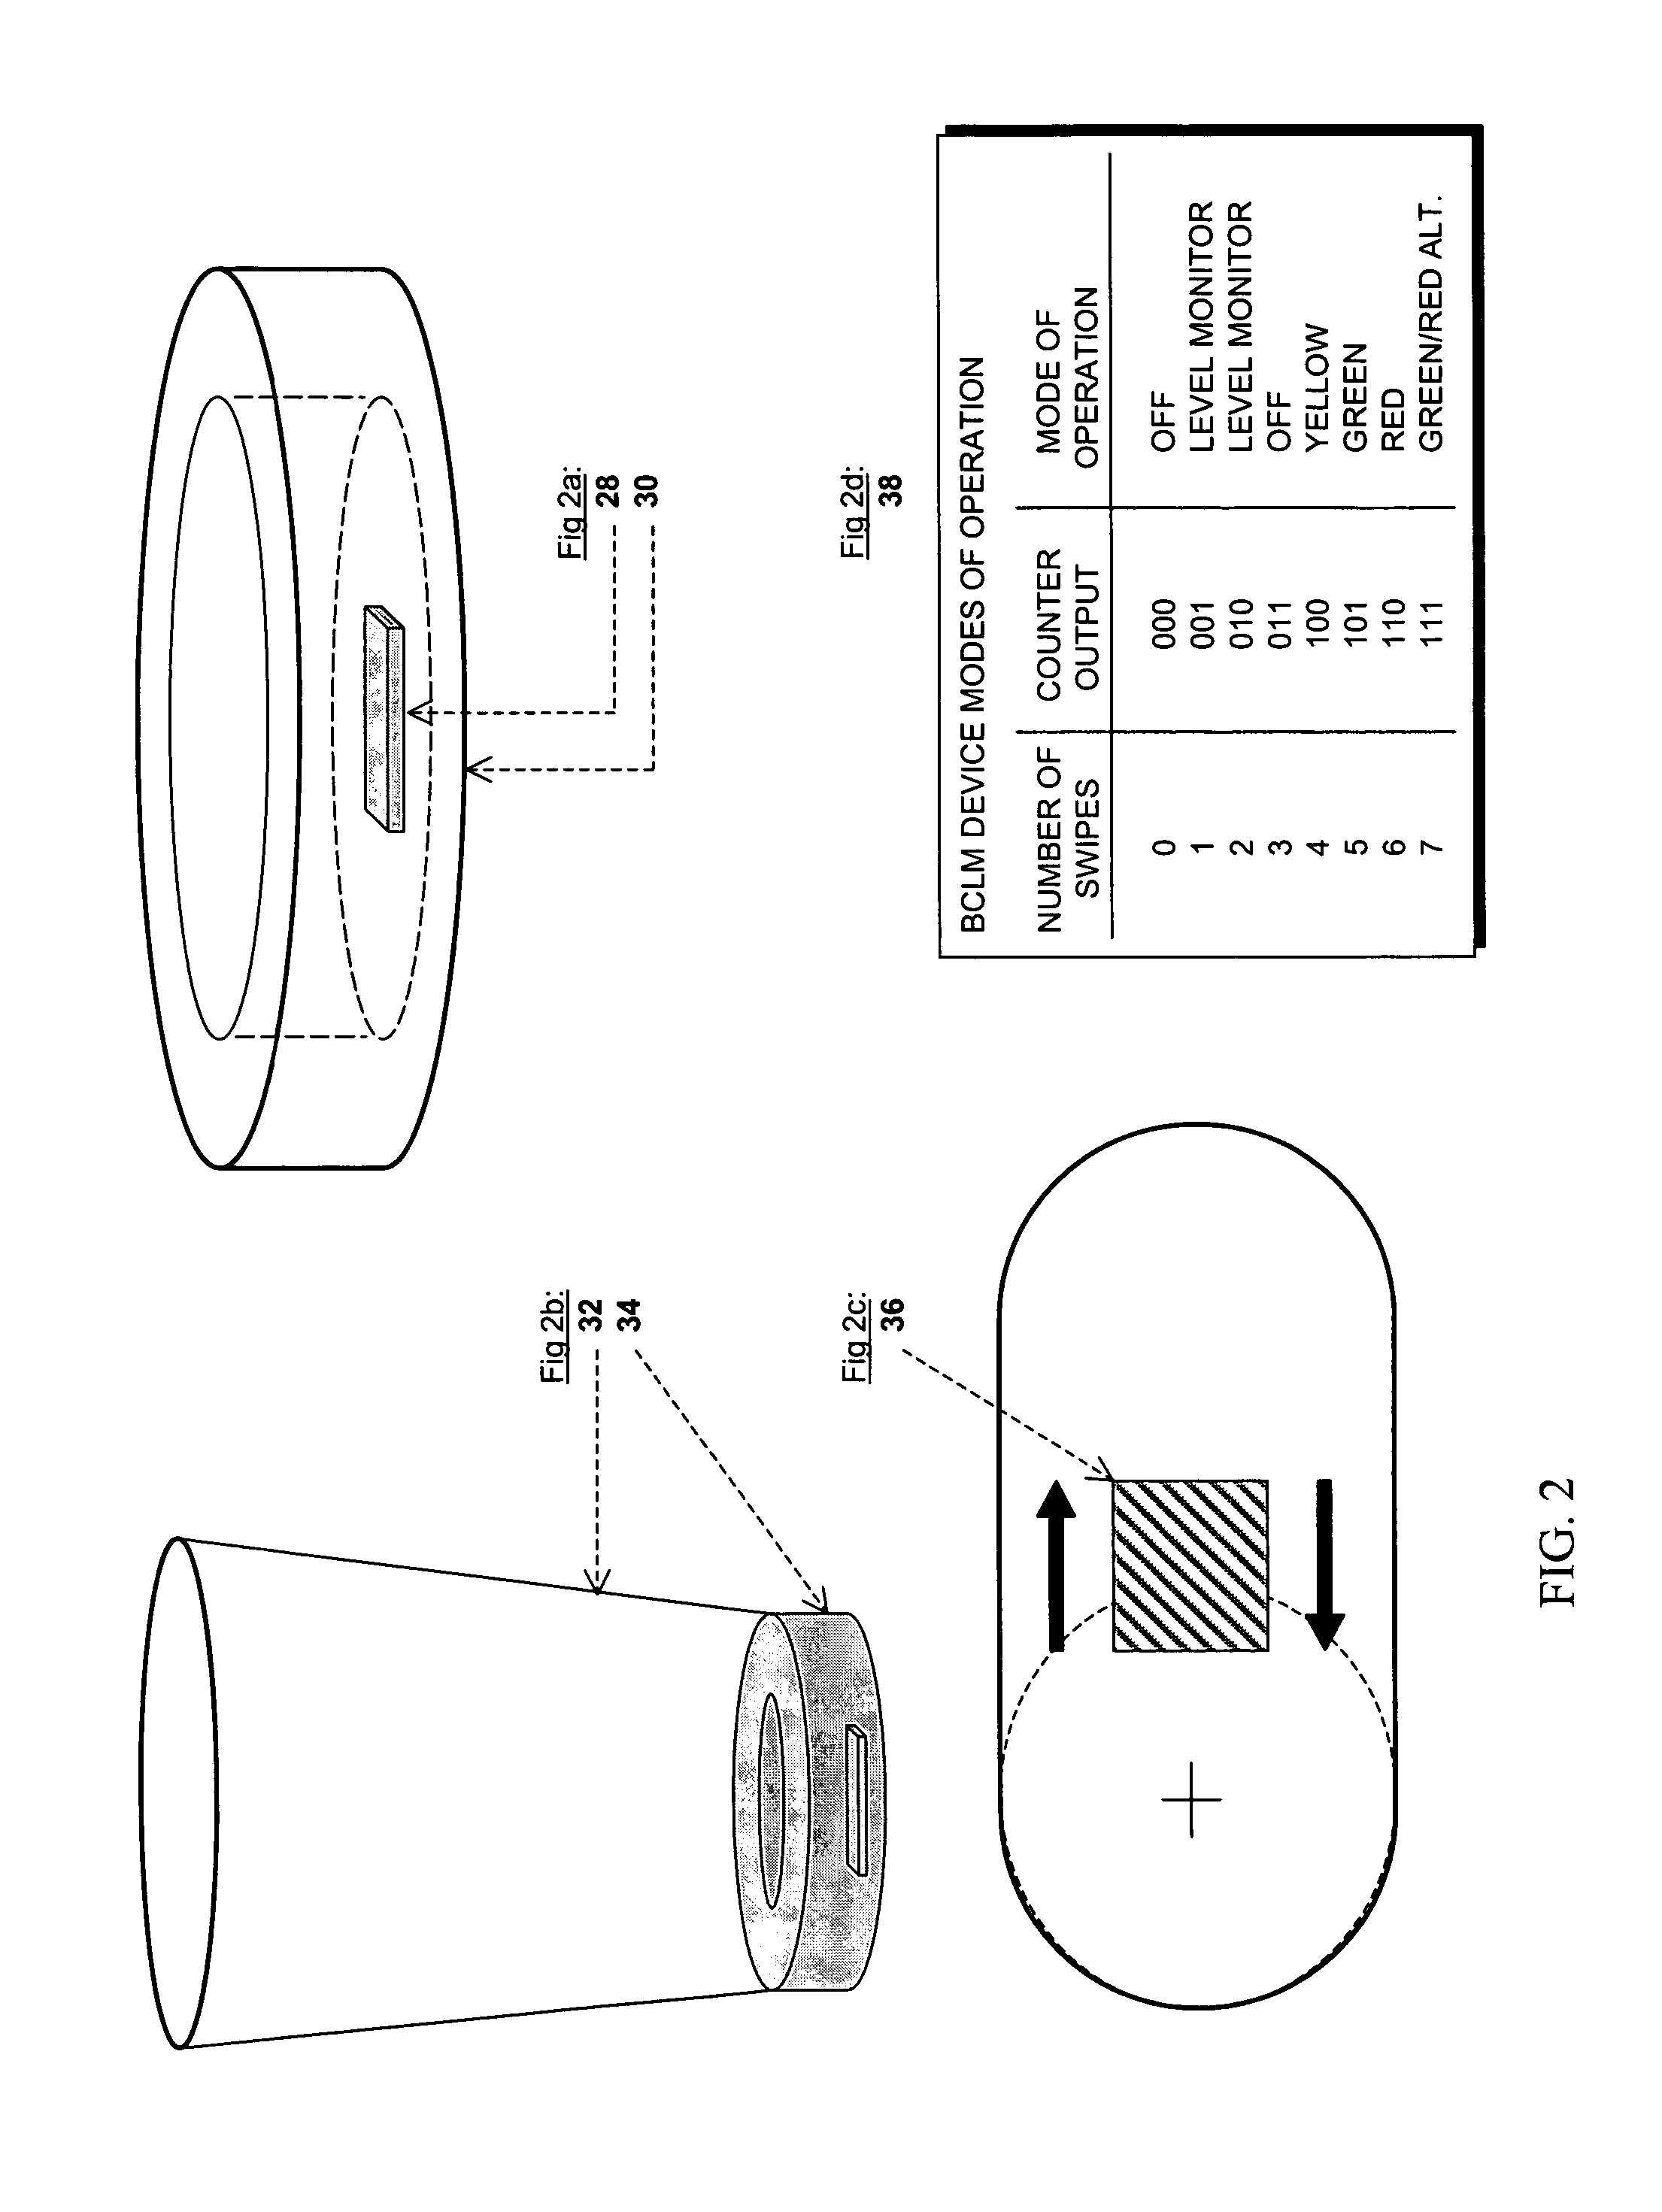 Device for monitoring a beverage consumption level